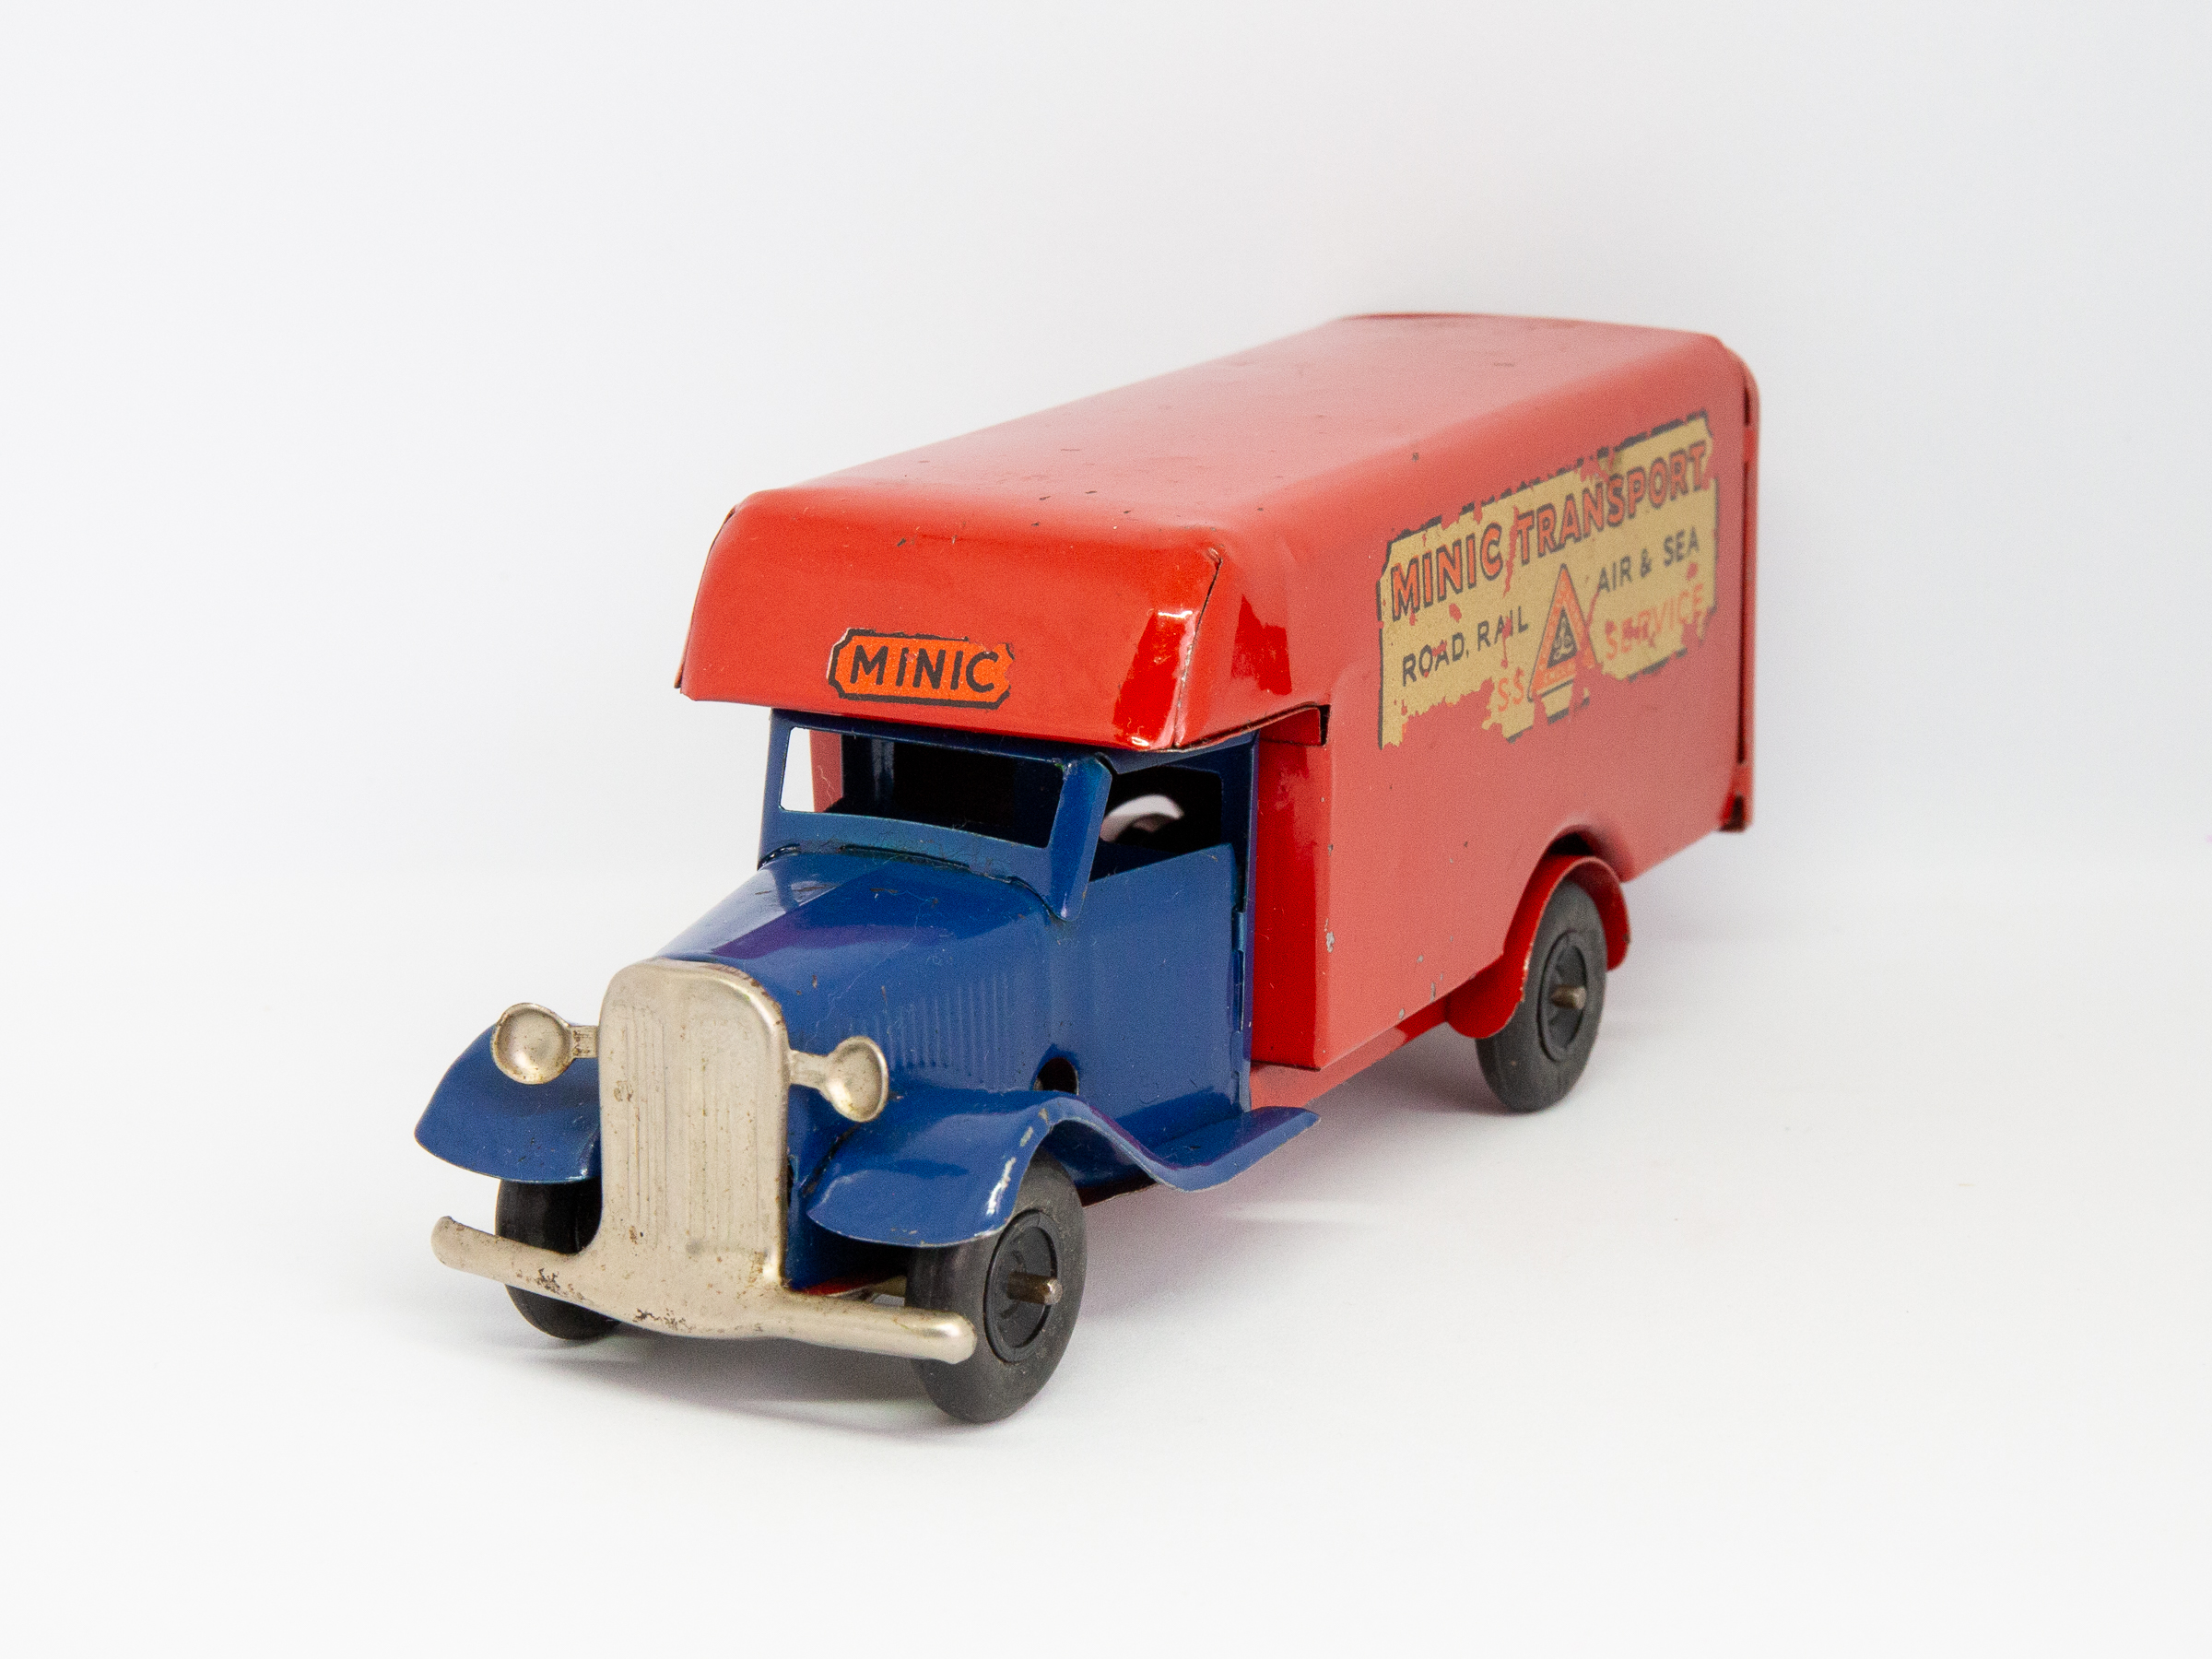 Vintage Minic clockwork delivery van. Wonderful Minic clockwork toy van including original key and box. Van measures approximately 150mm long by 46mm wide and 62mm tall. Main photo showing van only at a diagonal angle with van front in bottom left of photo.